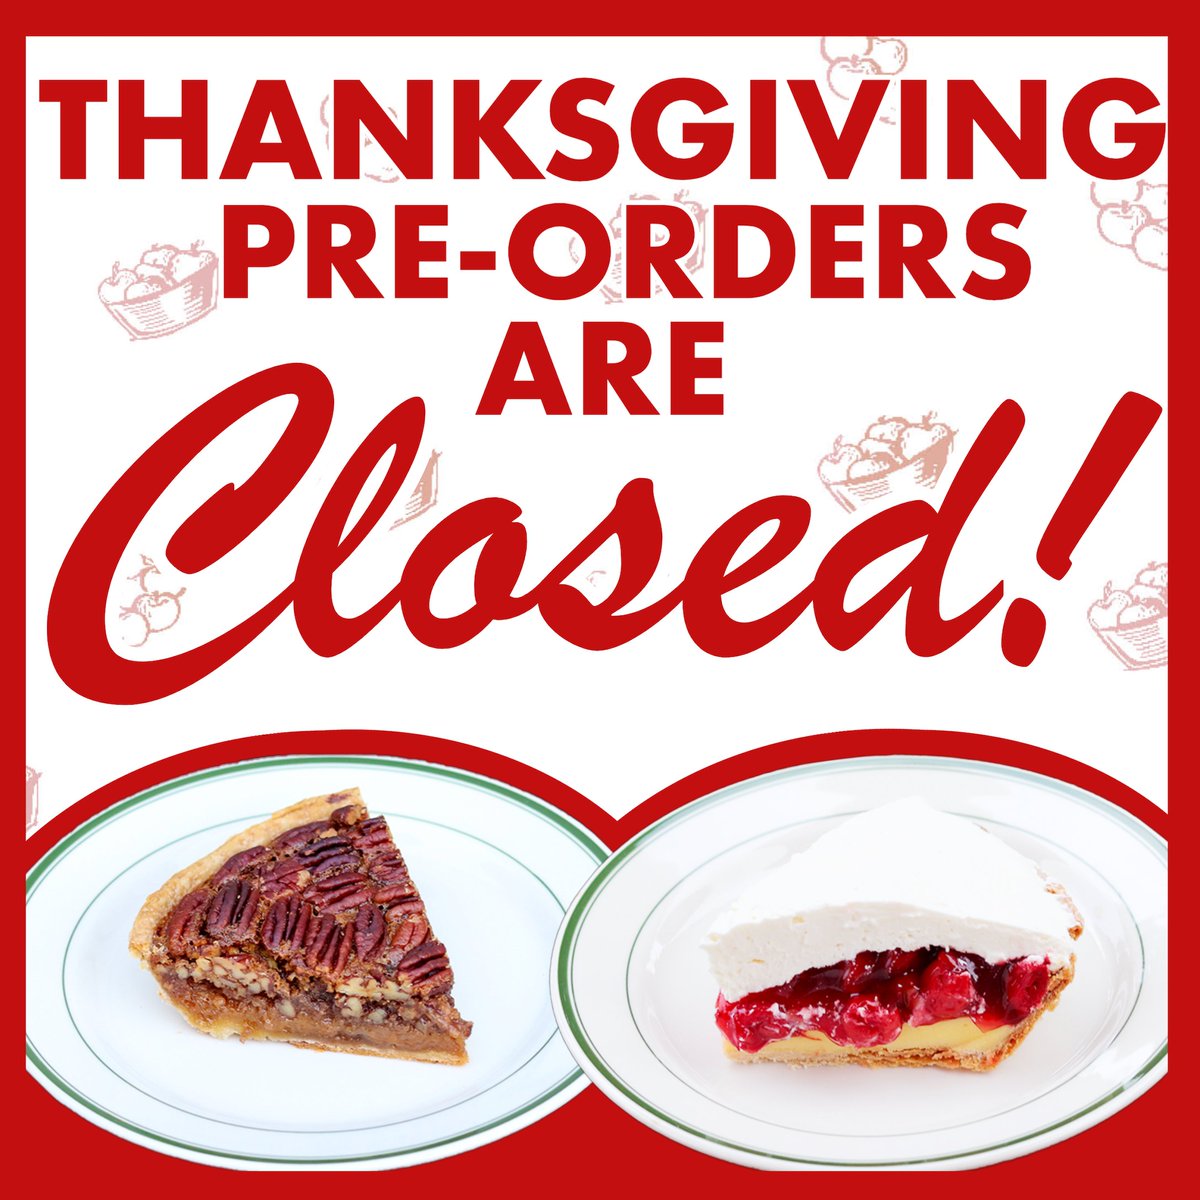 Wow, that was fast! All our available pre-order times have Sold Out! Fresh pies will still be available for walk-up purchases on 11/23 & 11/24 until we sell out. See you all soon! #pies #thanksgivingpies #pietime #pieslice #pumpkinpie #pecanpie #thanksgiving #yum #thankful